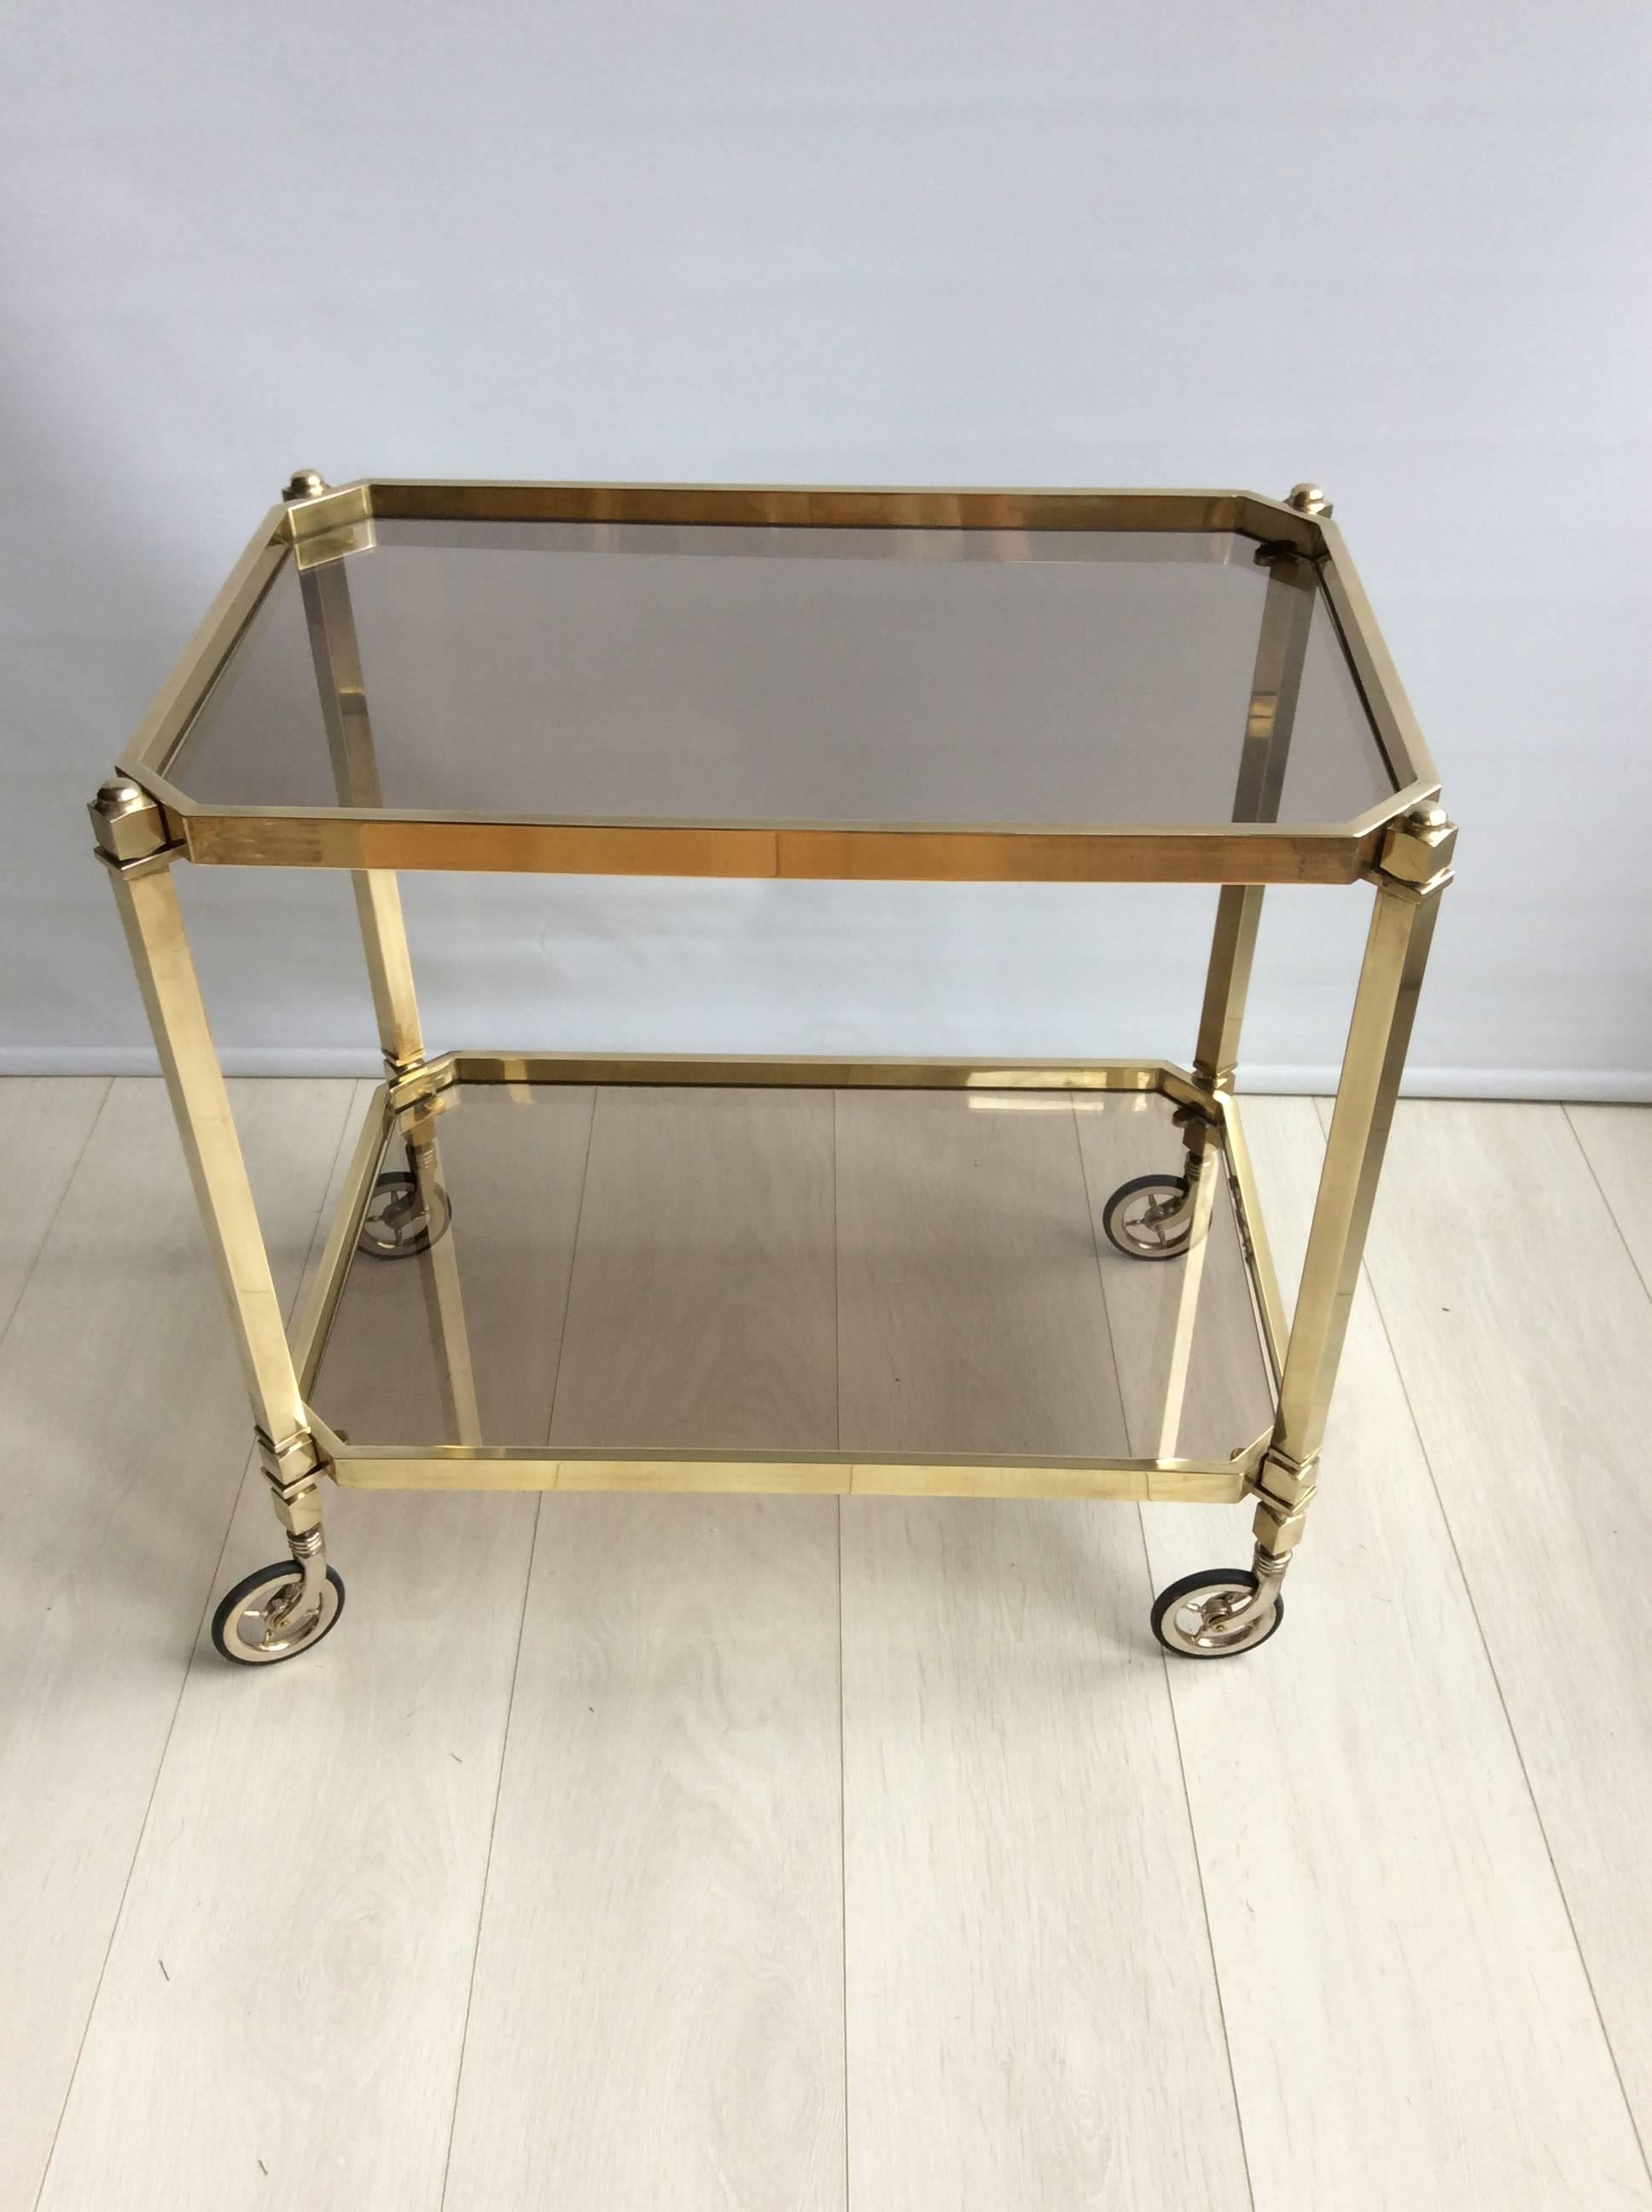 Clean lines, good quality piece with smoked glass trays

Top tray measures 58cm wide, 37cm deep and 56cm tall
Overall dims 59cm wide, 38.5cm deep and 58.5cm tall
